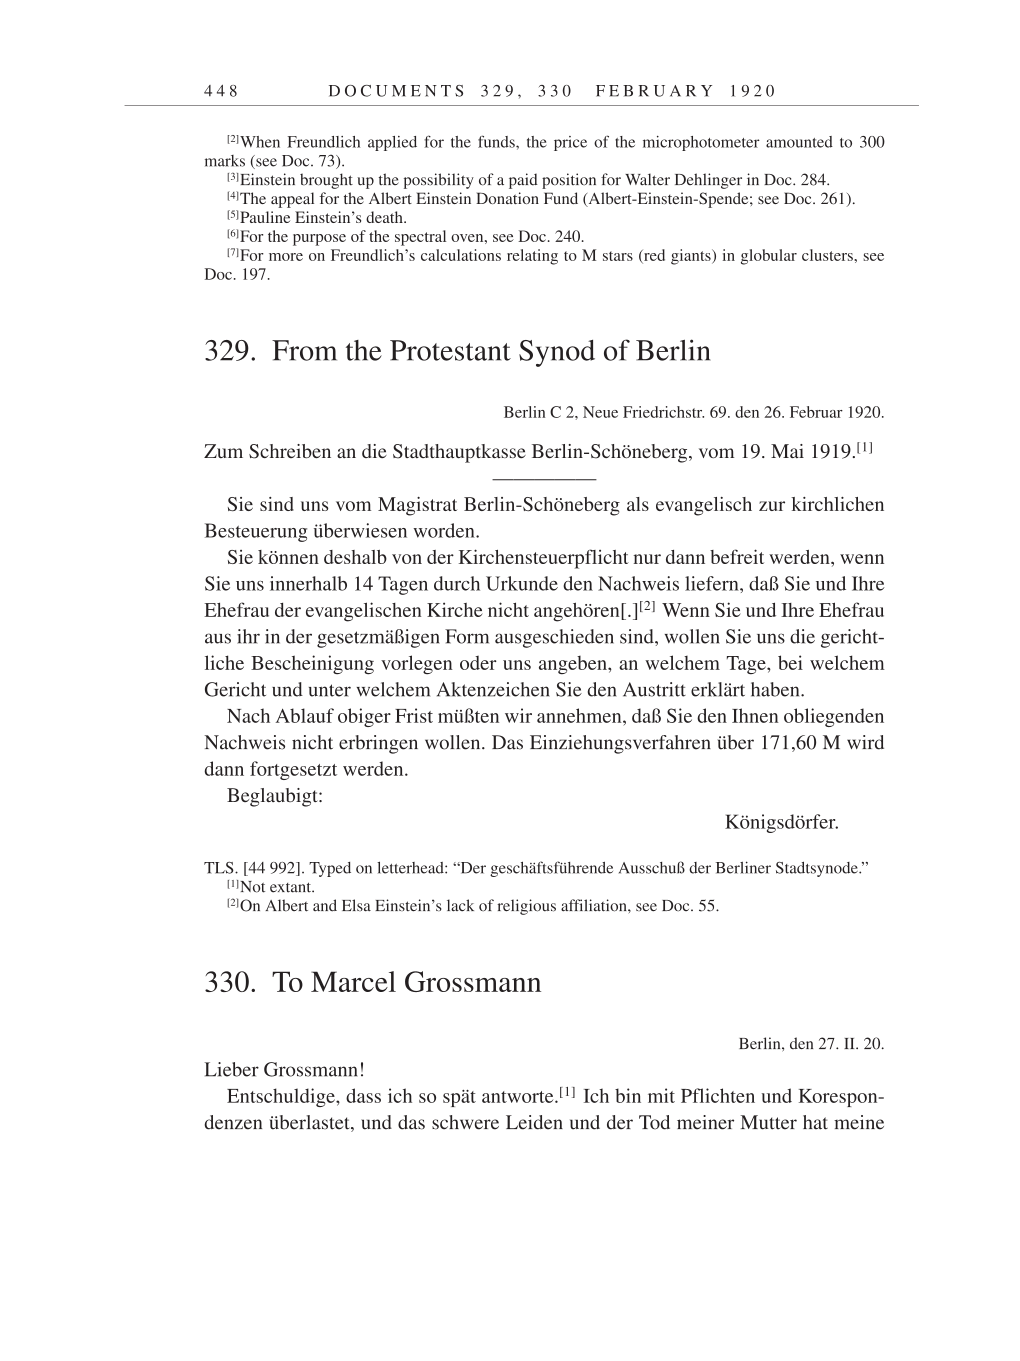 Volume 9: The Berlin Years: Correspondence January 1919-April 1920 page 448